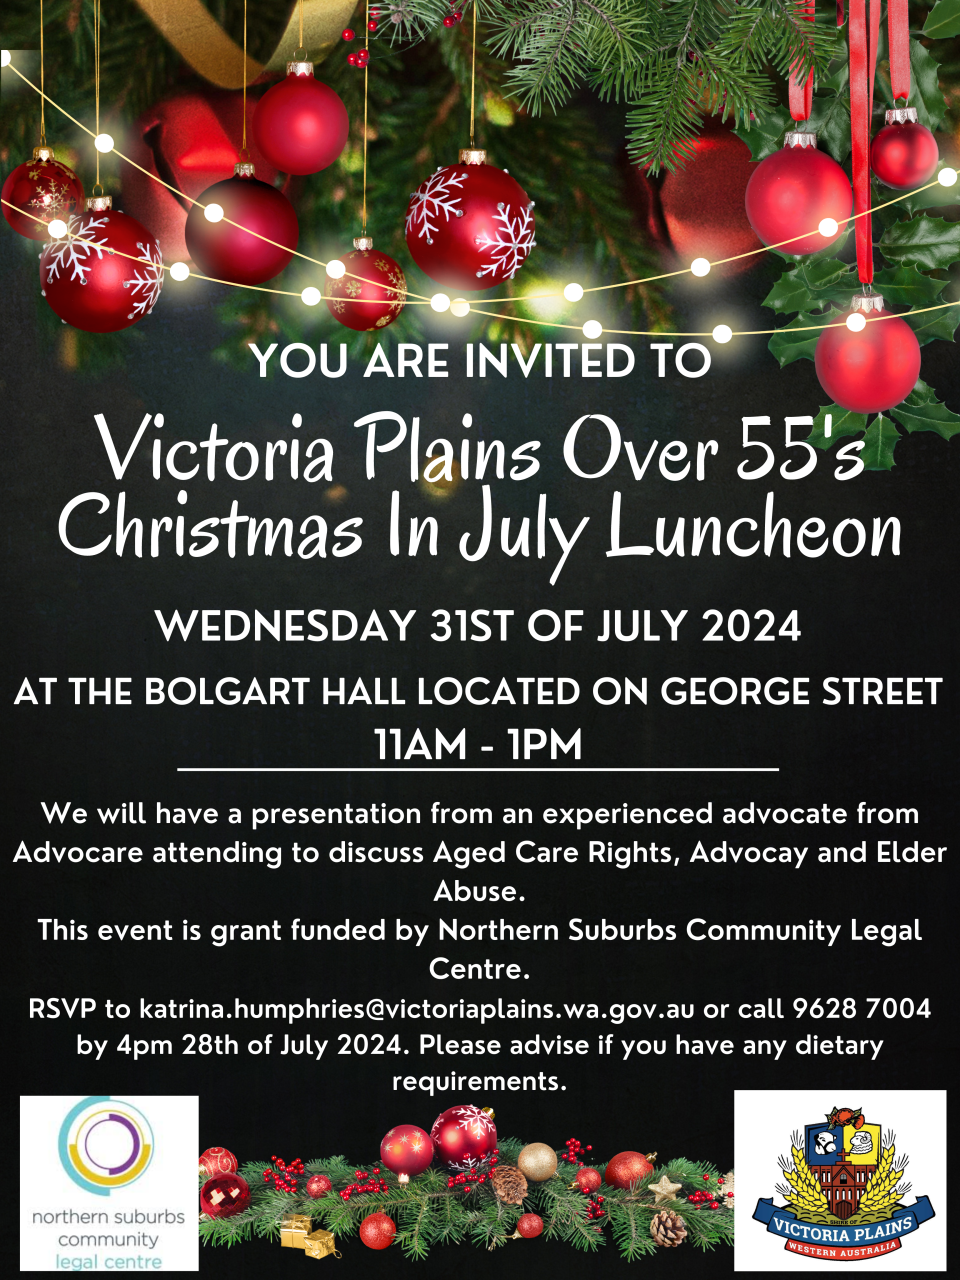 Over 55's Christmas in July Luncheon